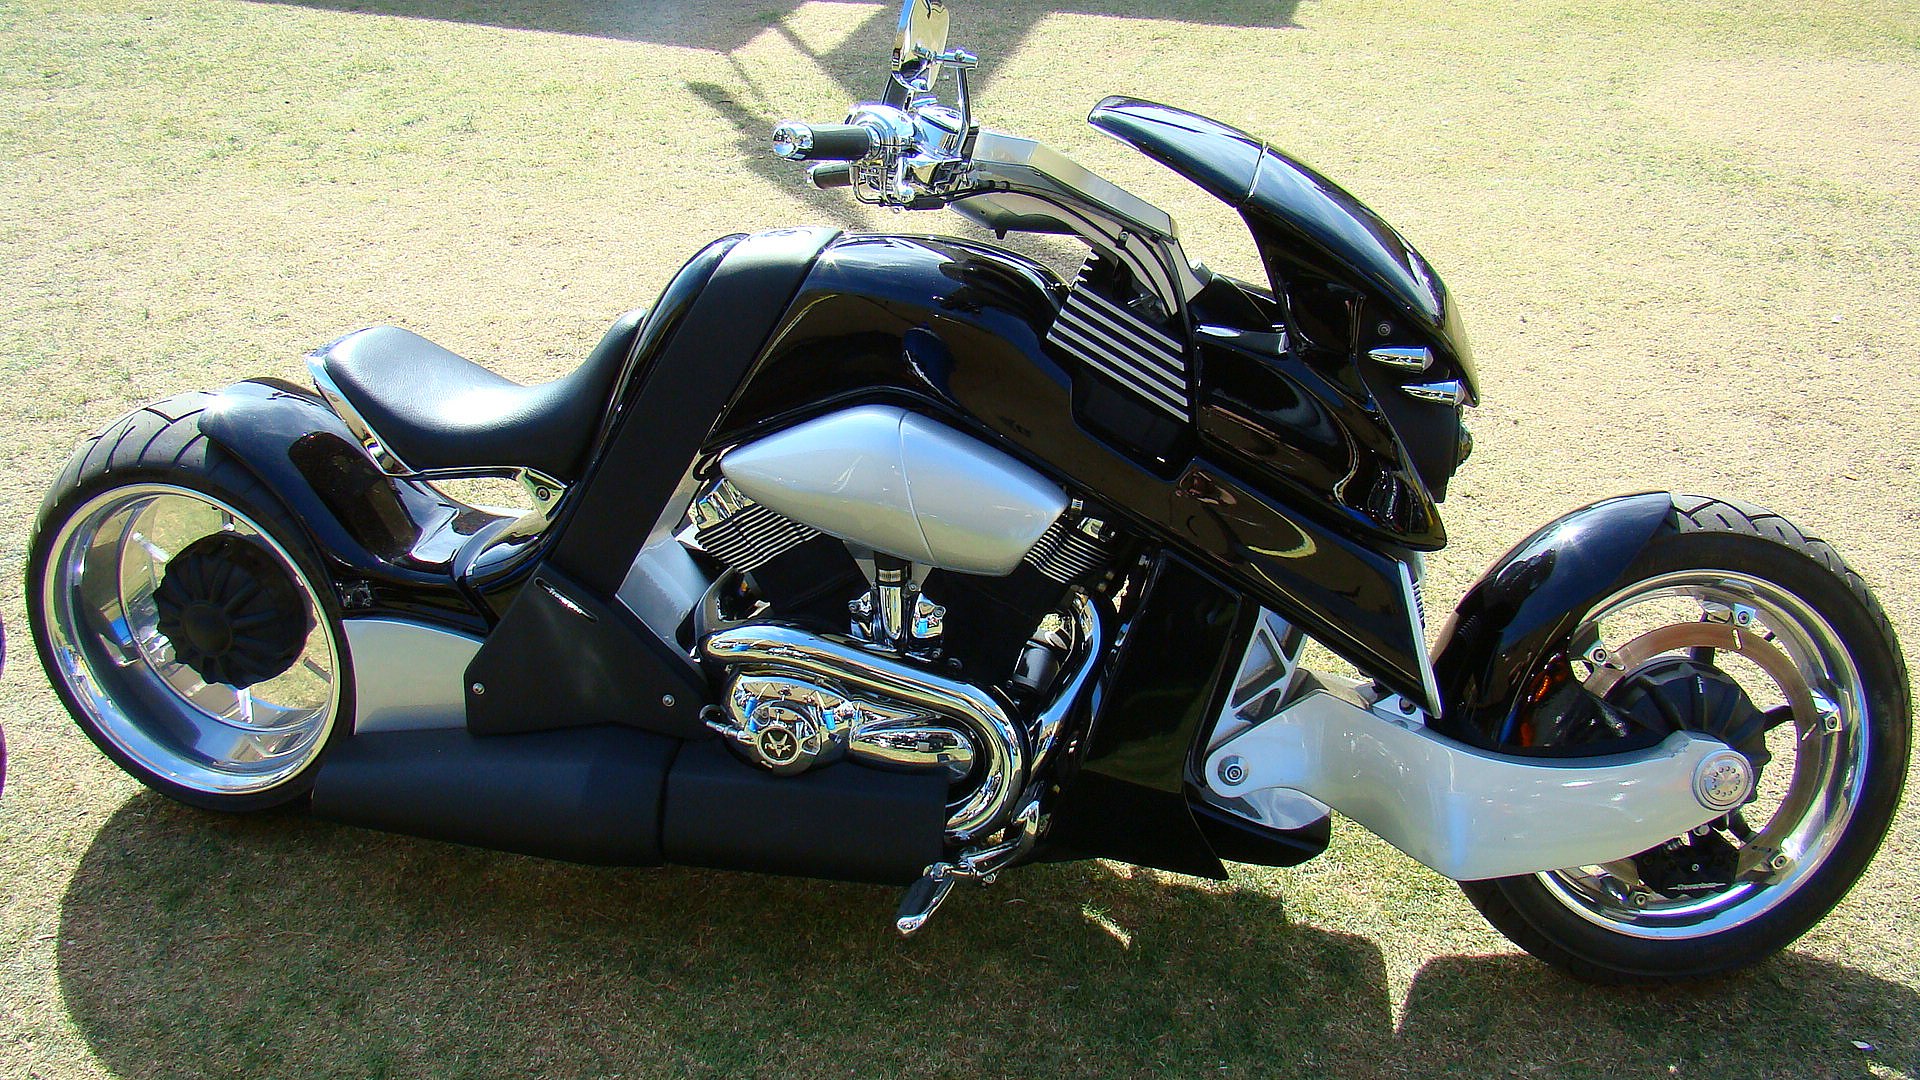 A sleek black motorcycle on a open road, ready for a thrilling ride.